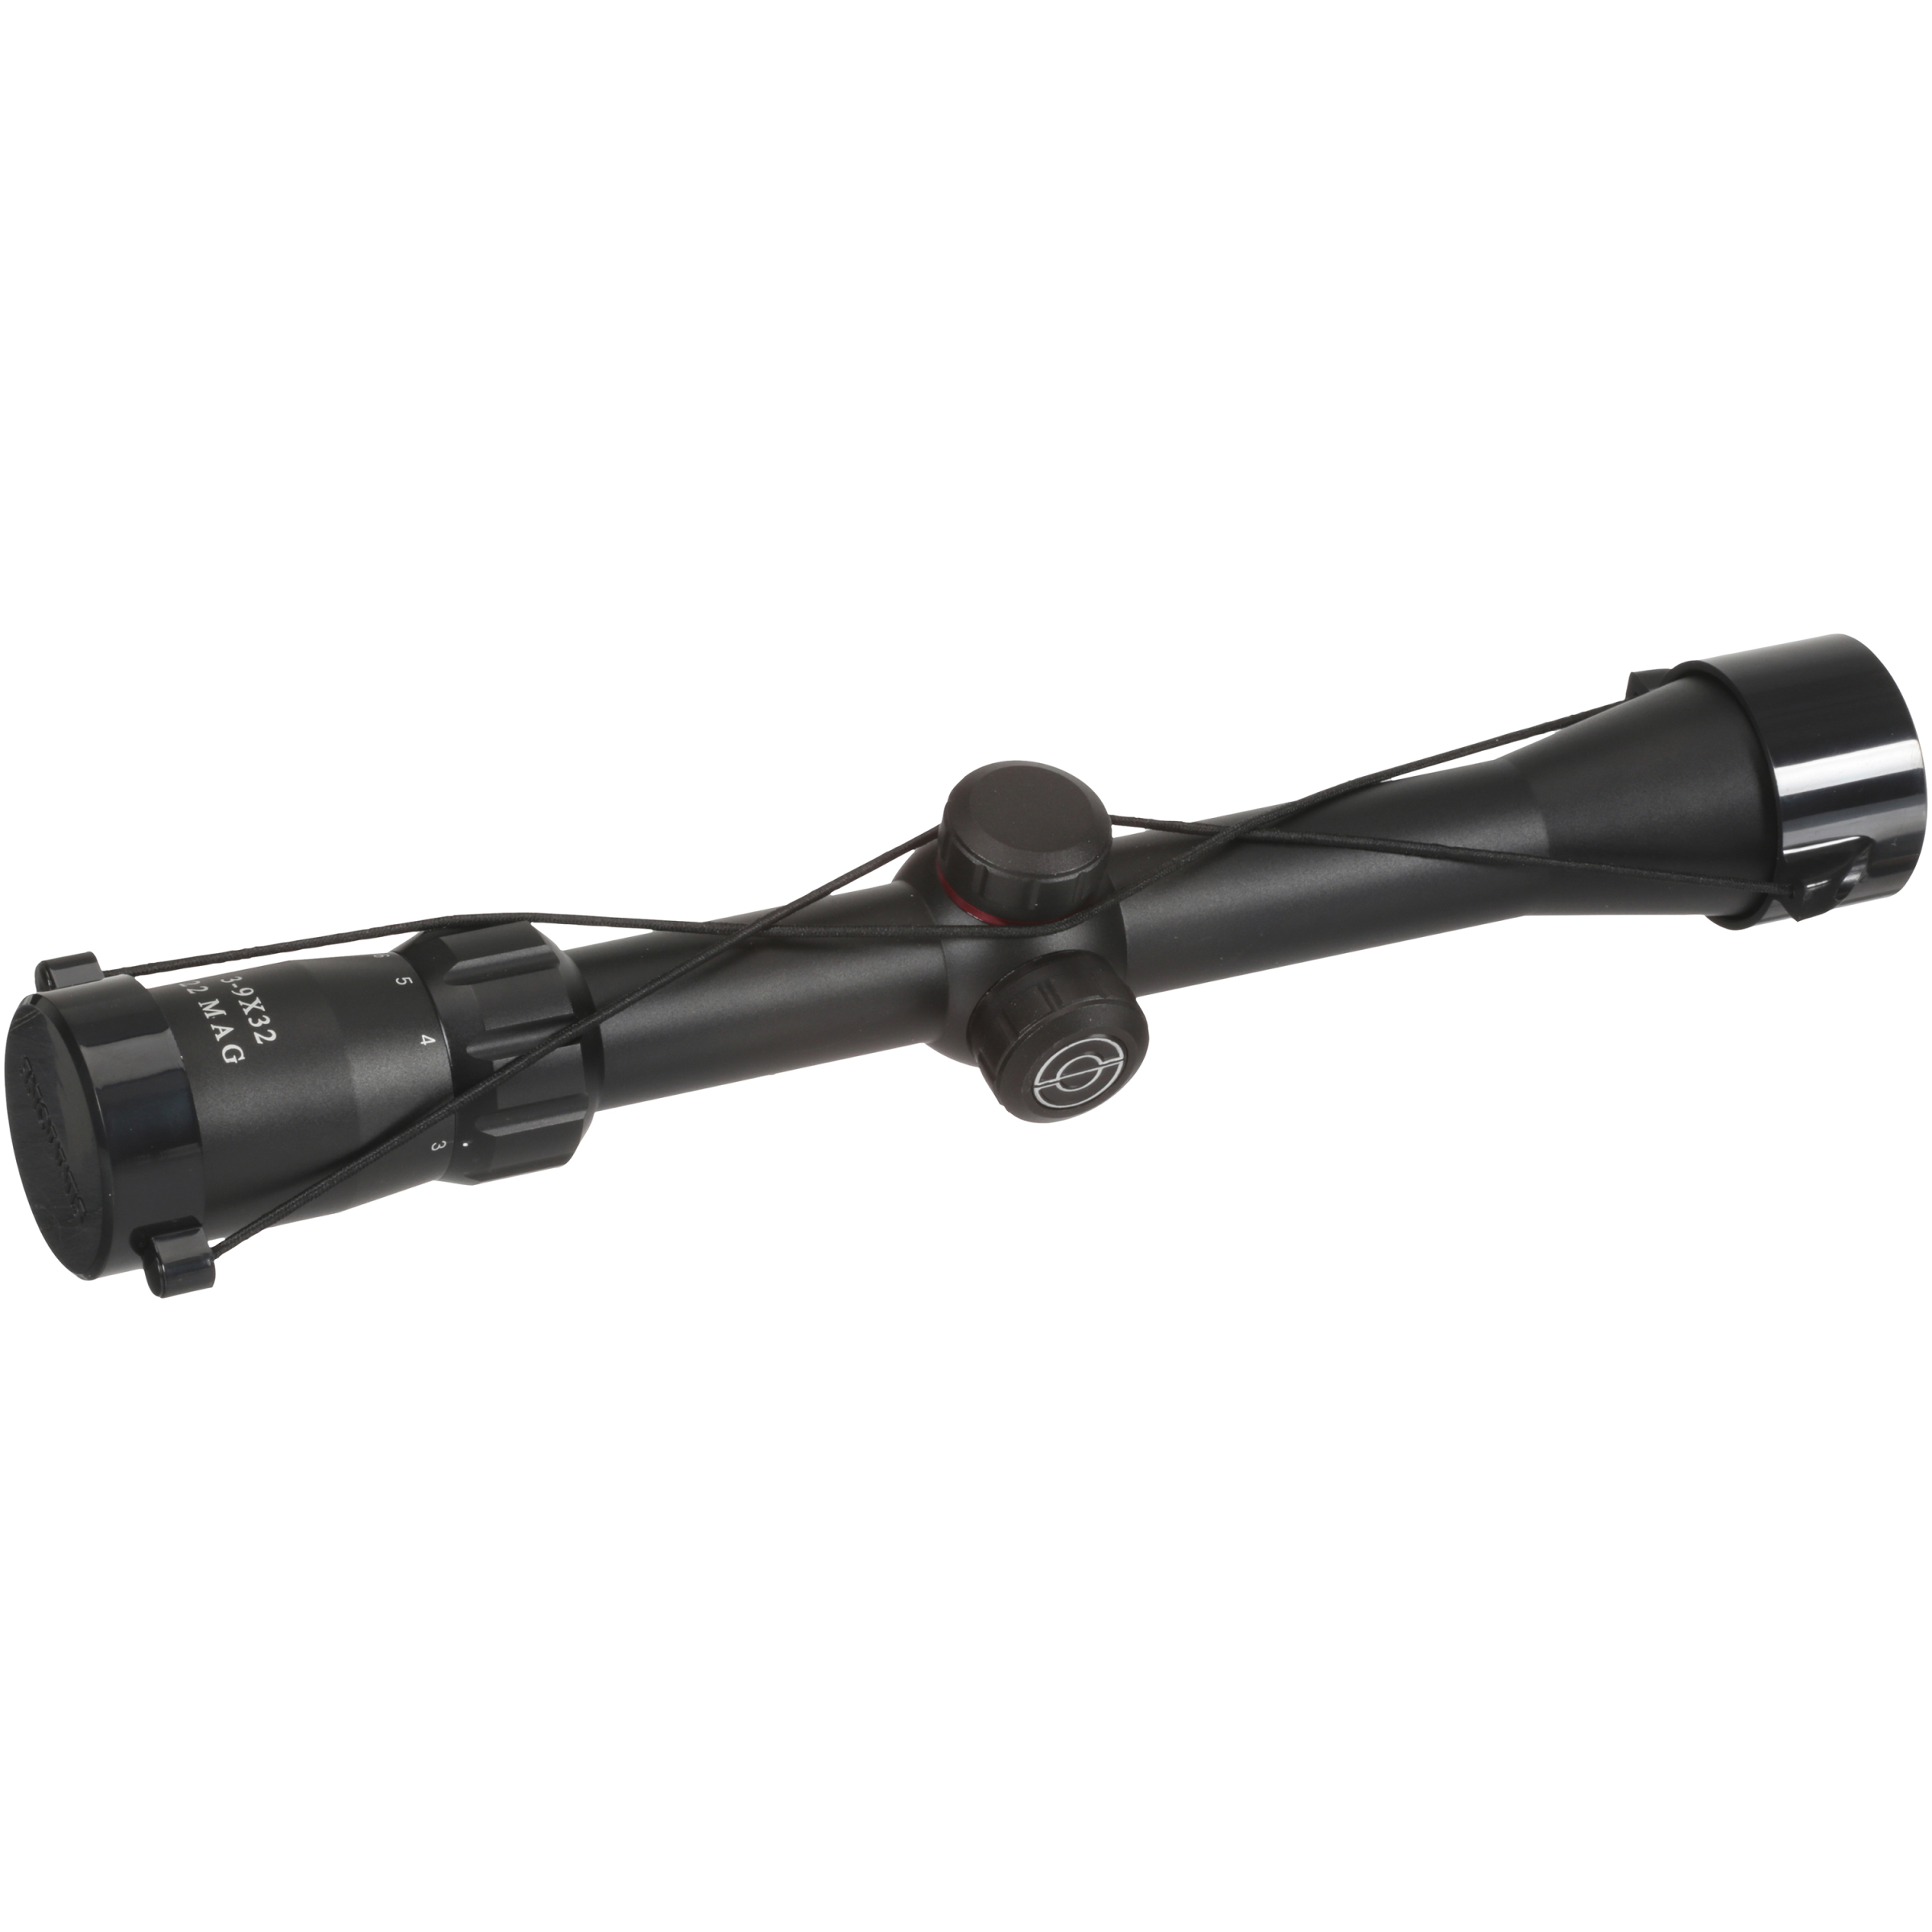 Simmons 22 Mag Riflescope, Truplex Reticle with Rings, Matte Black - image 3 of 4